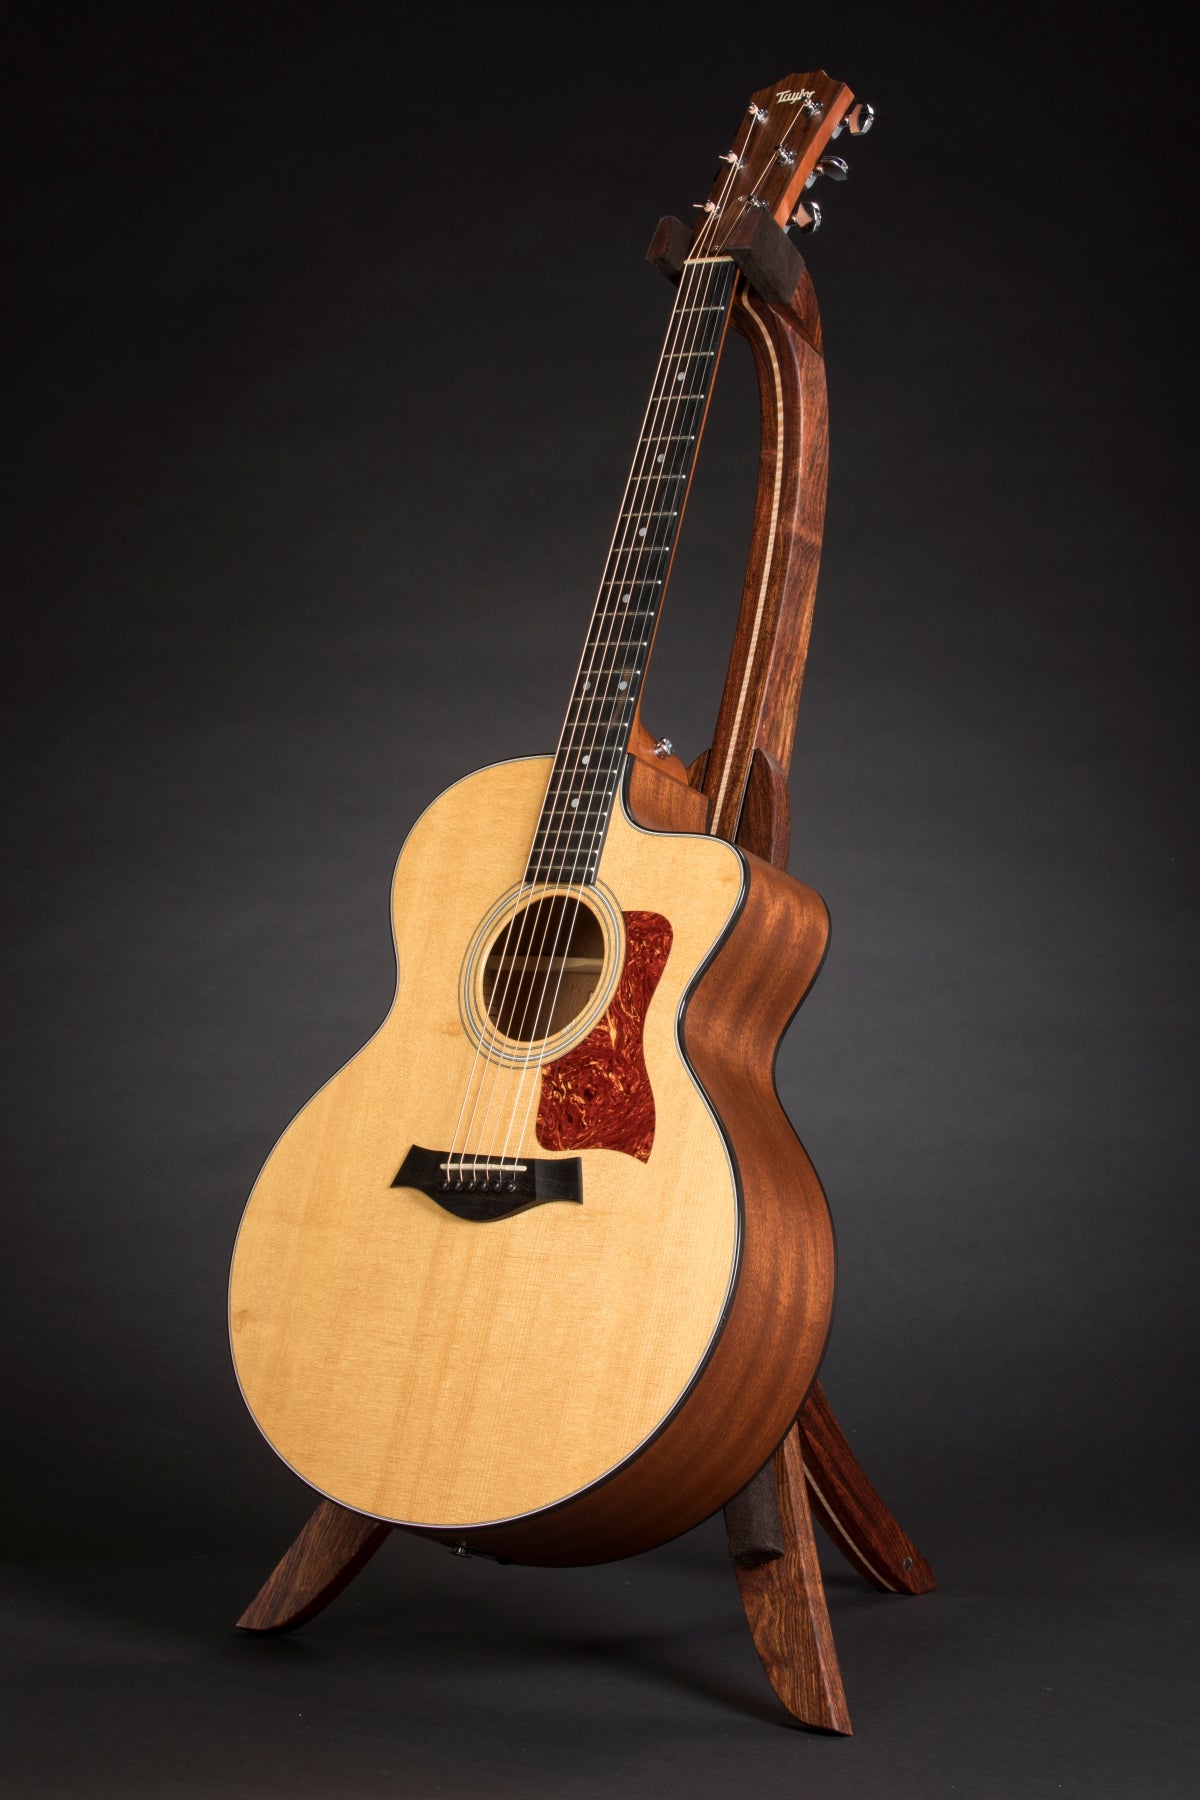 Folding chechen Caribbean rosewood and curly maple wood guitar floor stand full front image with Taylor guitar